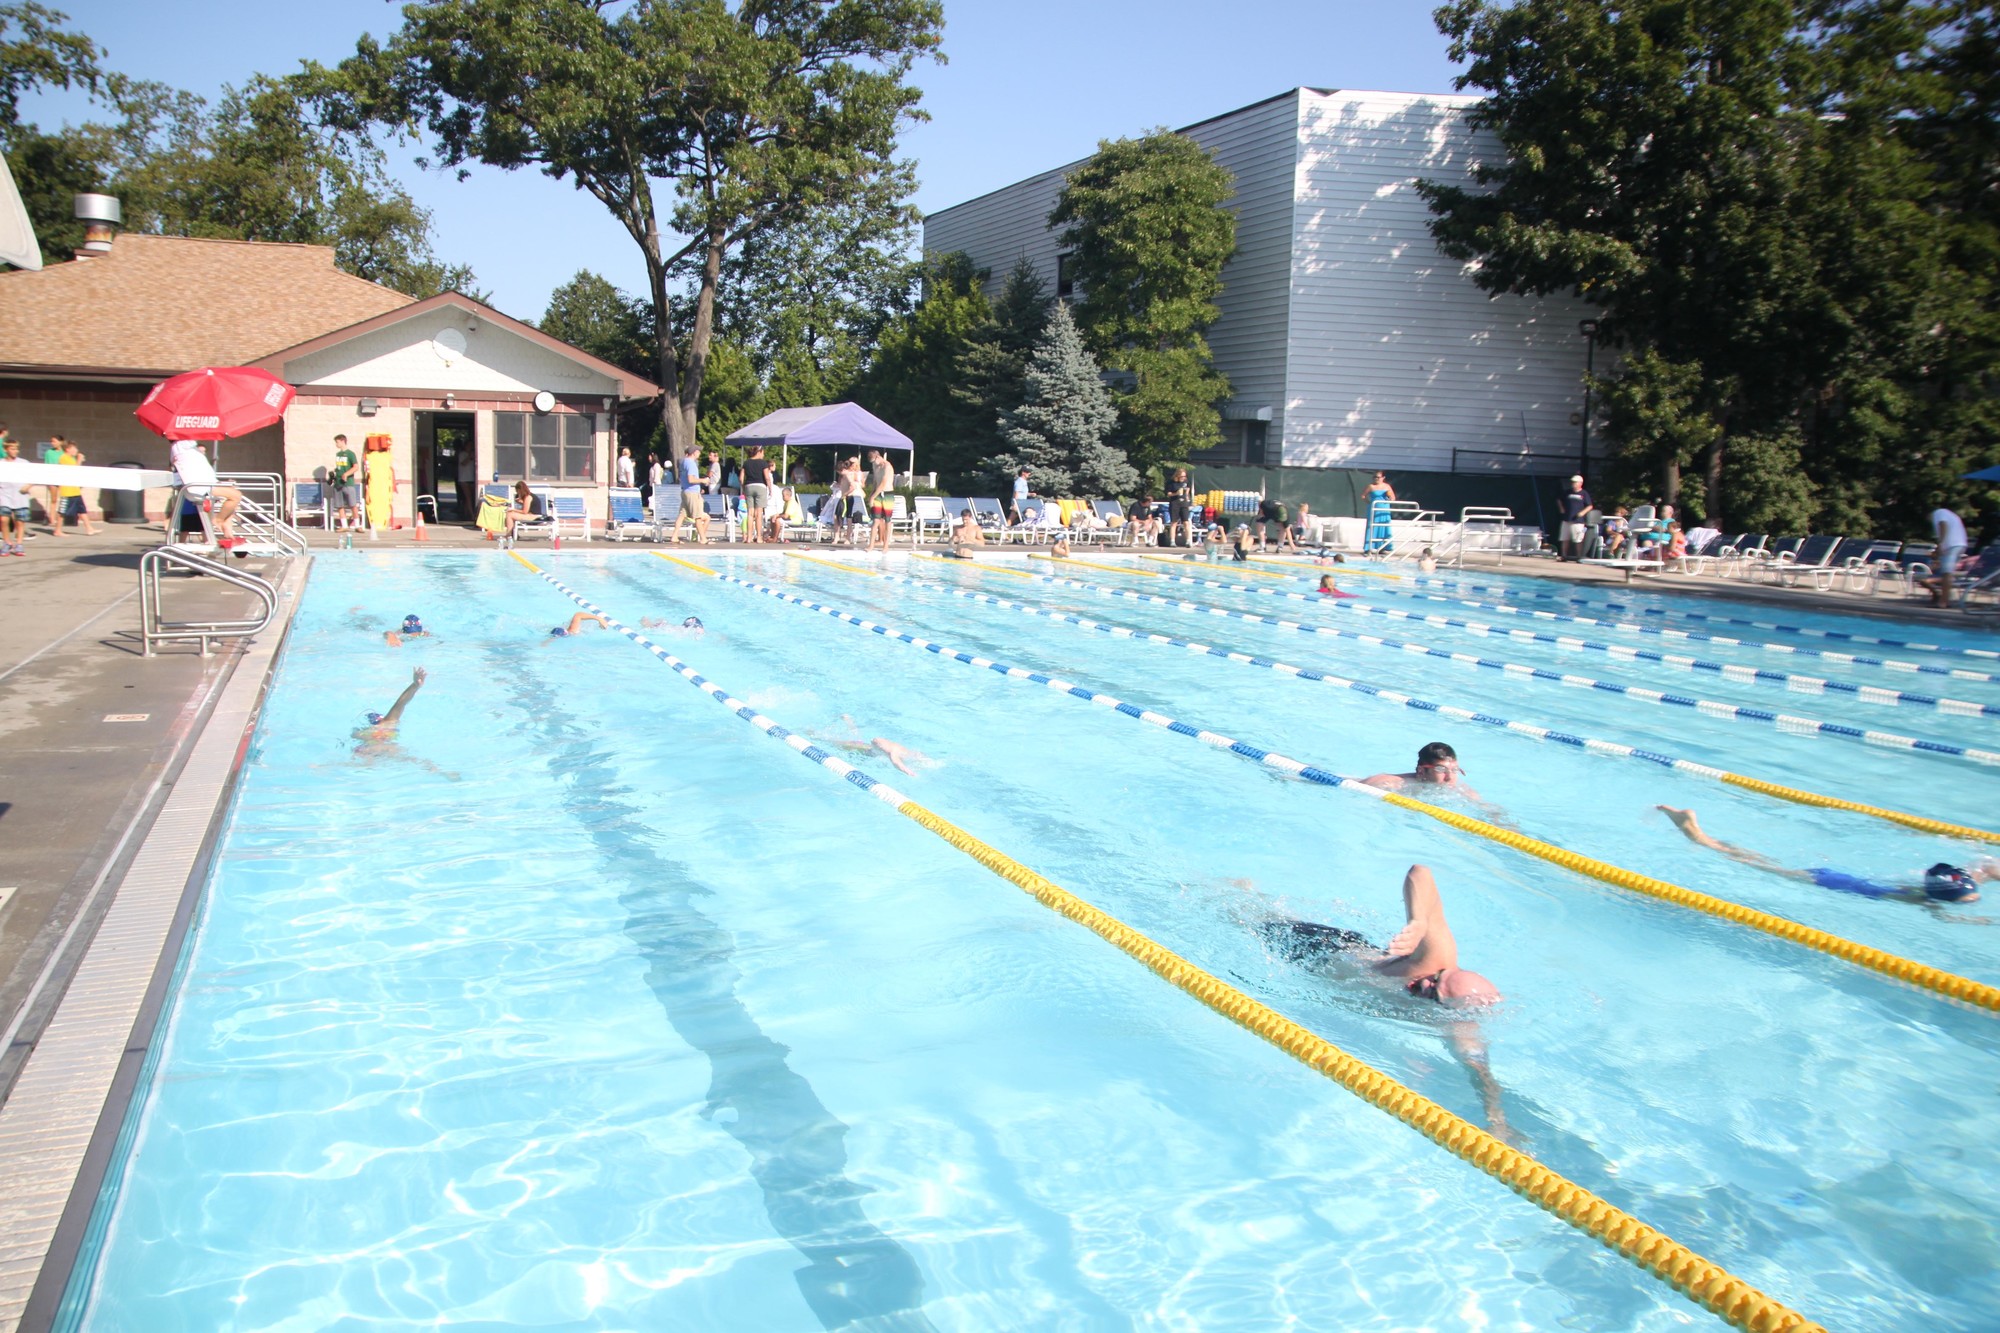 Last Saturday morning, swimmers came to the pool at Greis Park to participate in Swim Across America and raise money for a good cause.